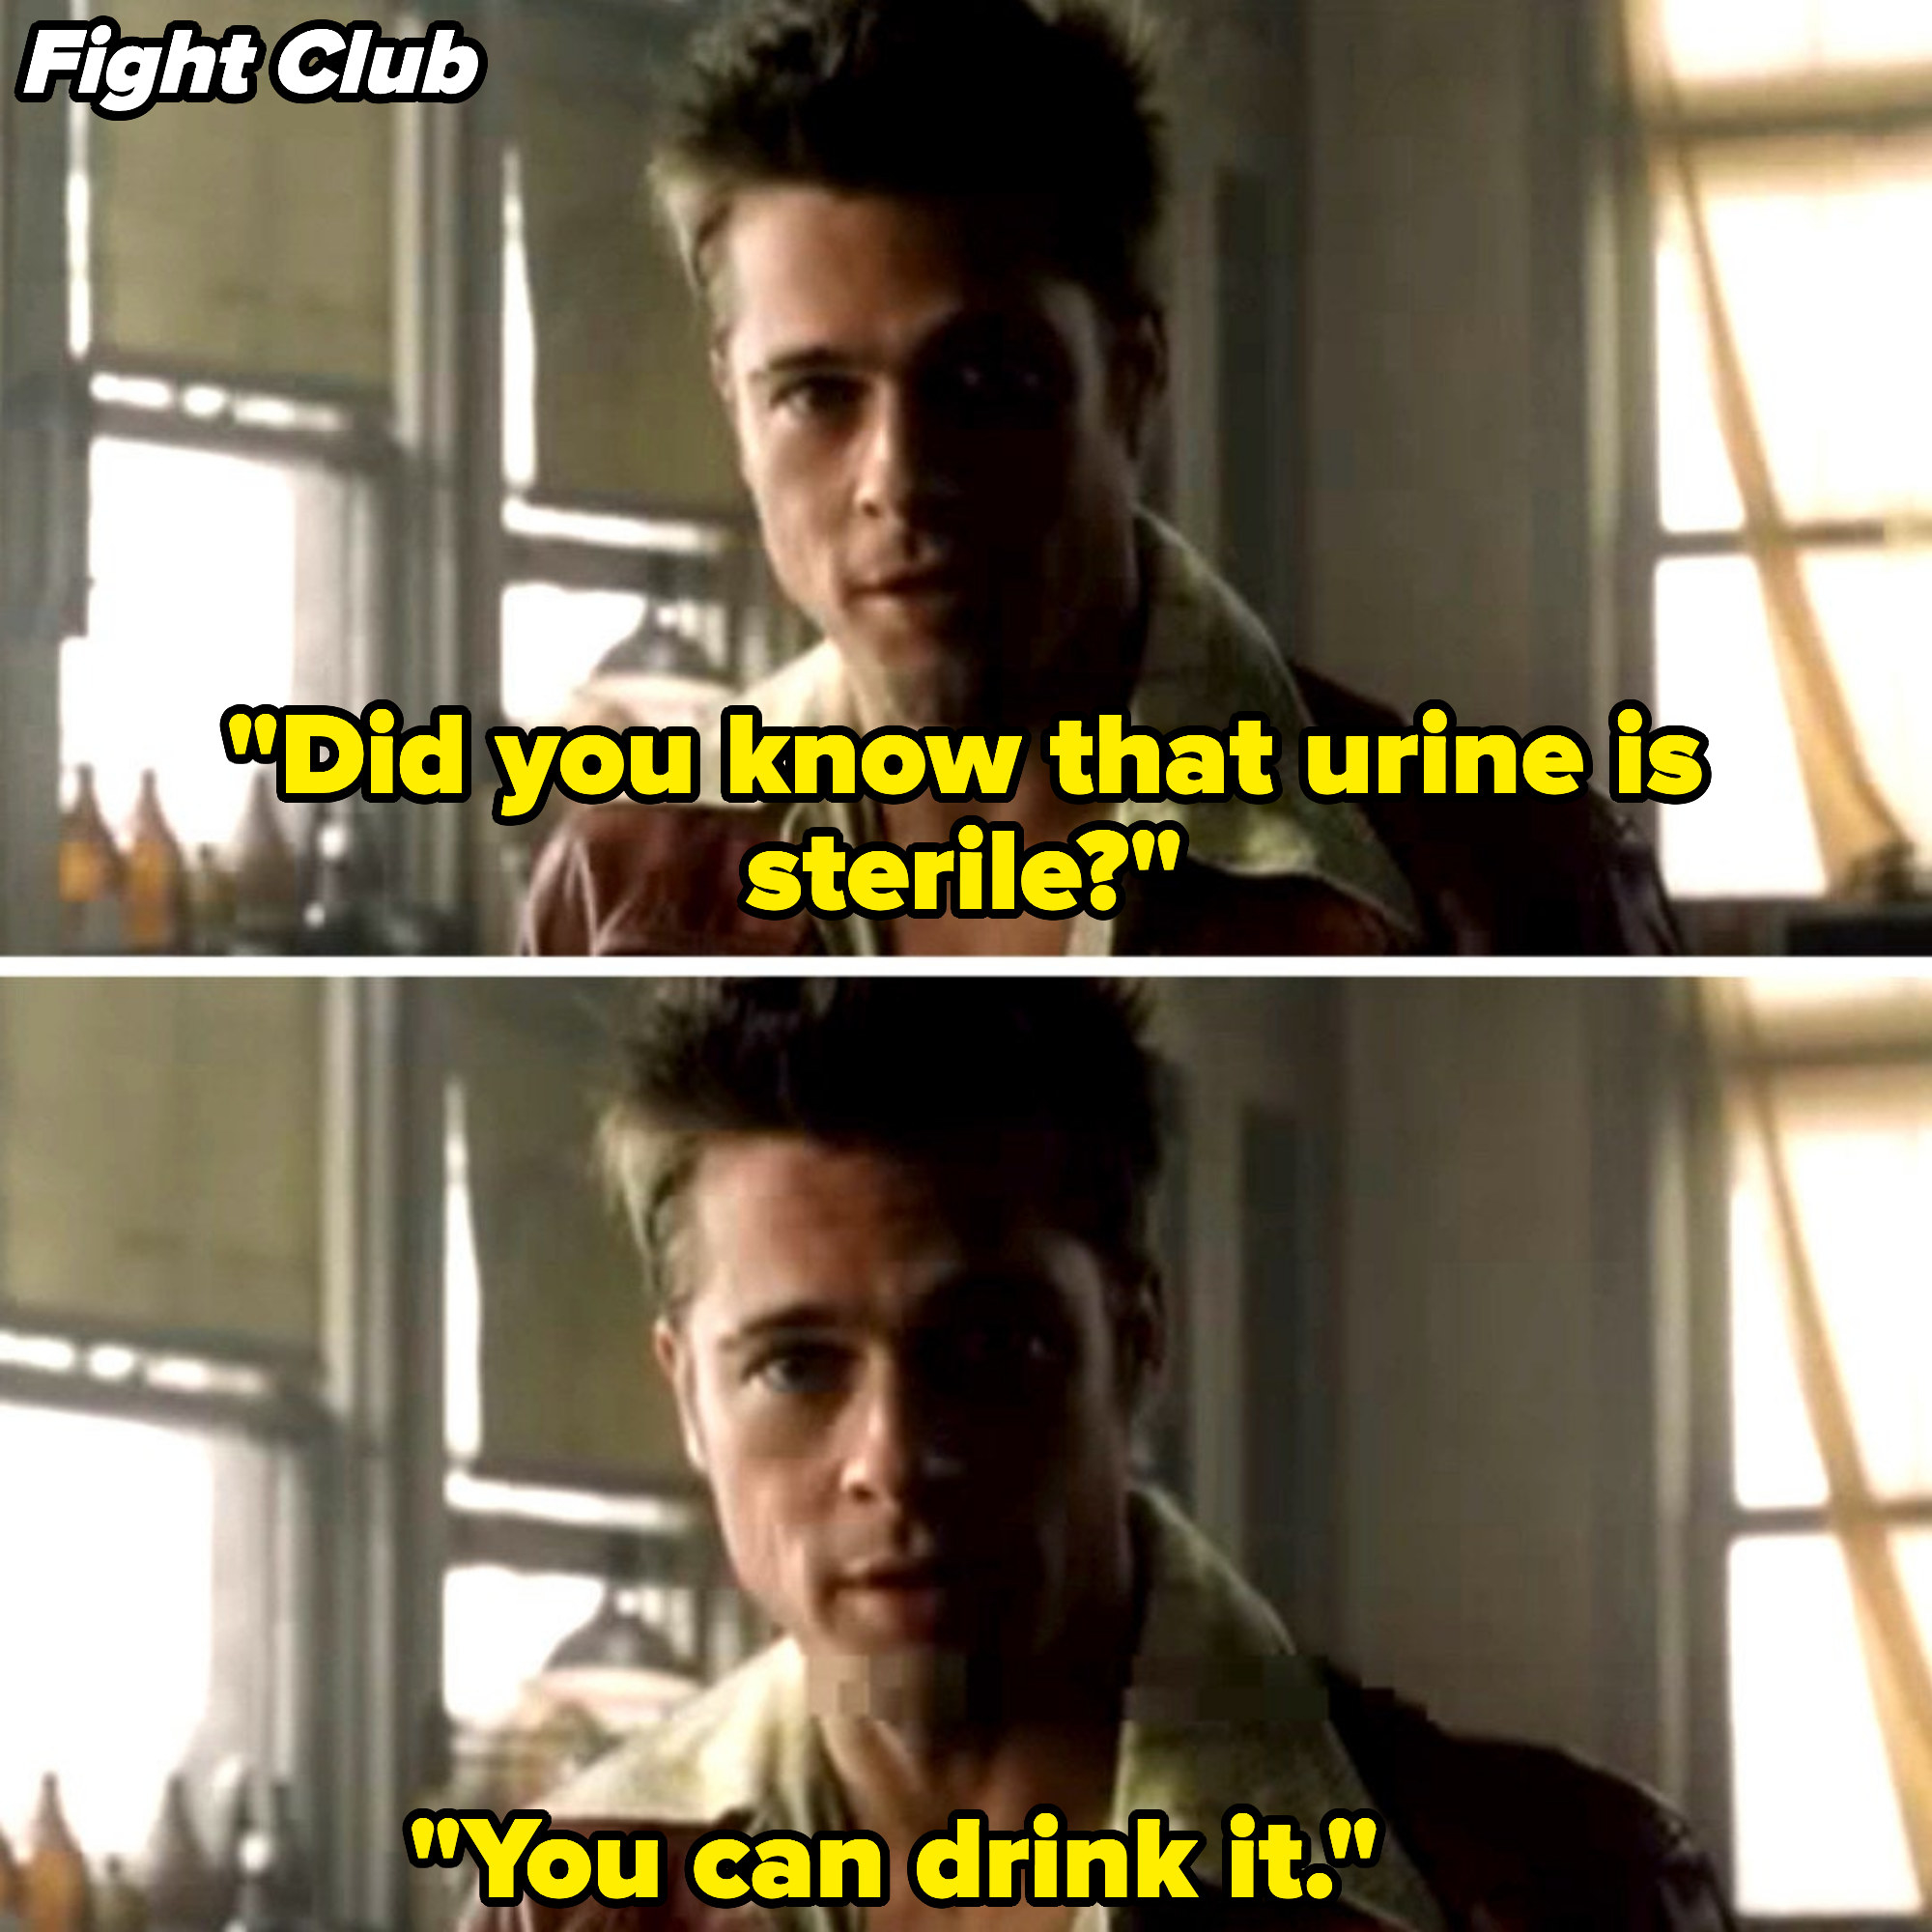 &quot;You can drink it.&quot;